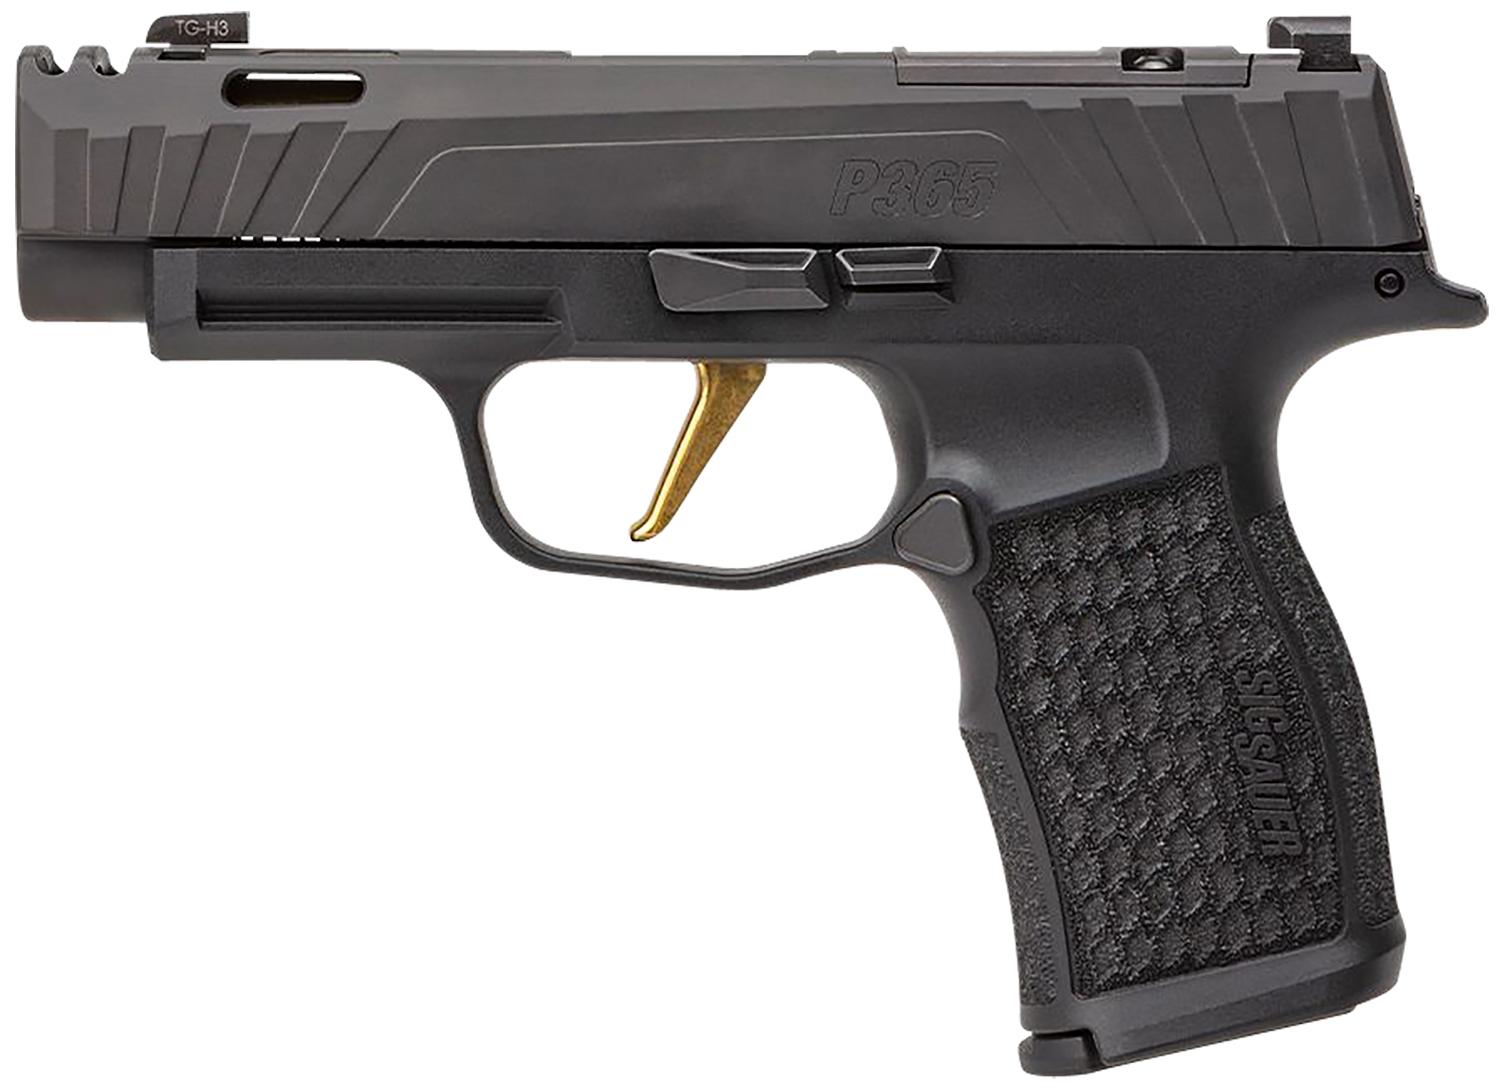 SIG SAUER P365XL Spectre 9mm 3.1in Black 12rd - $1199.99 (Free S/H on Firearms)